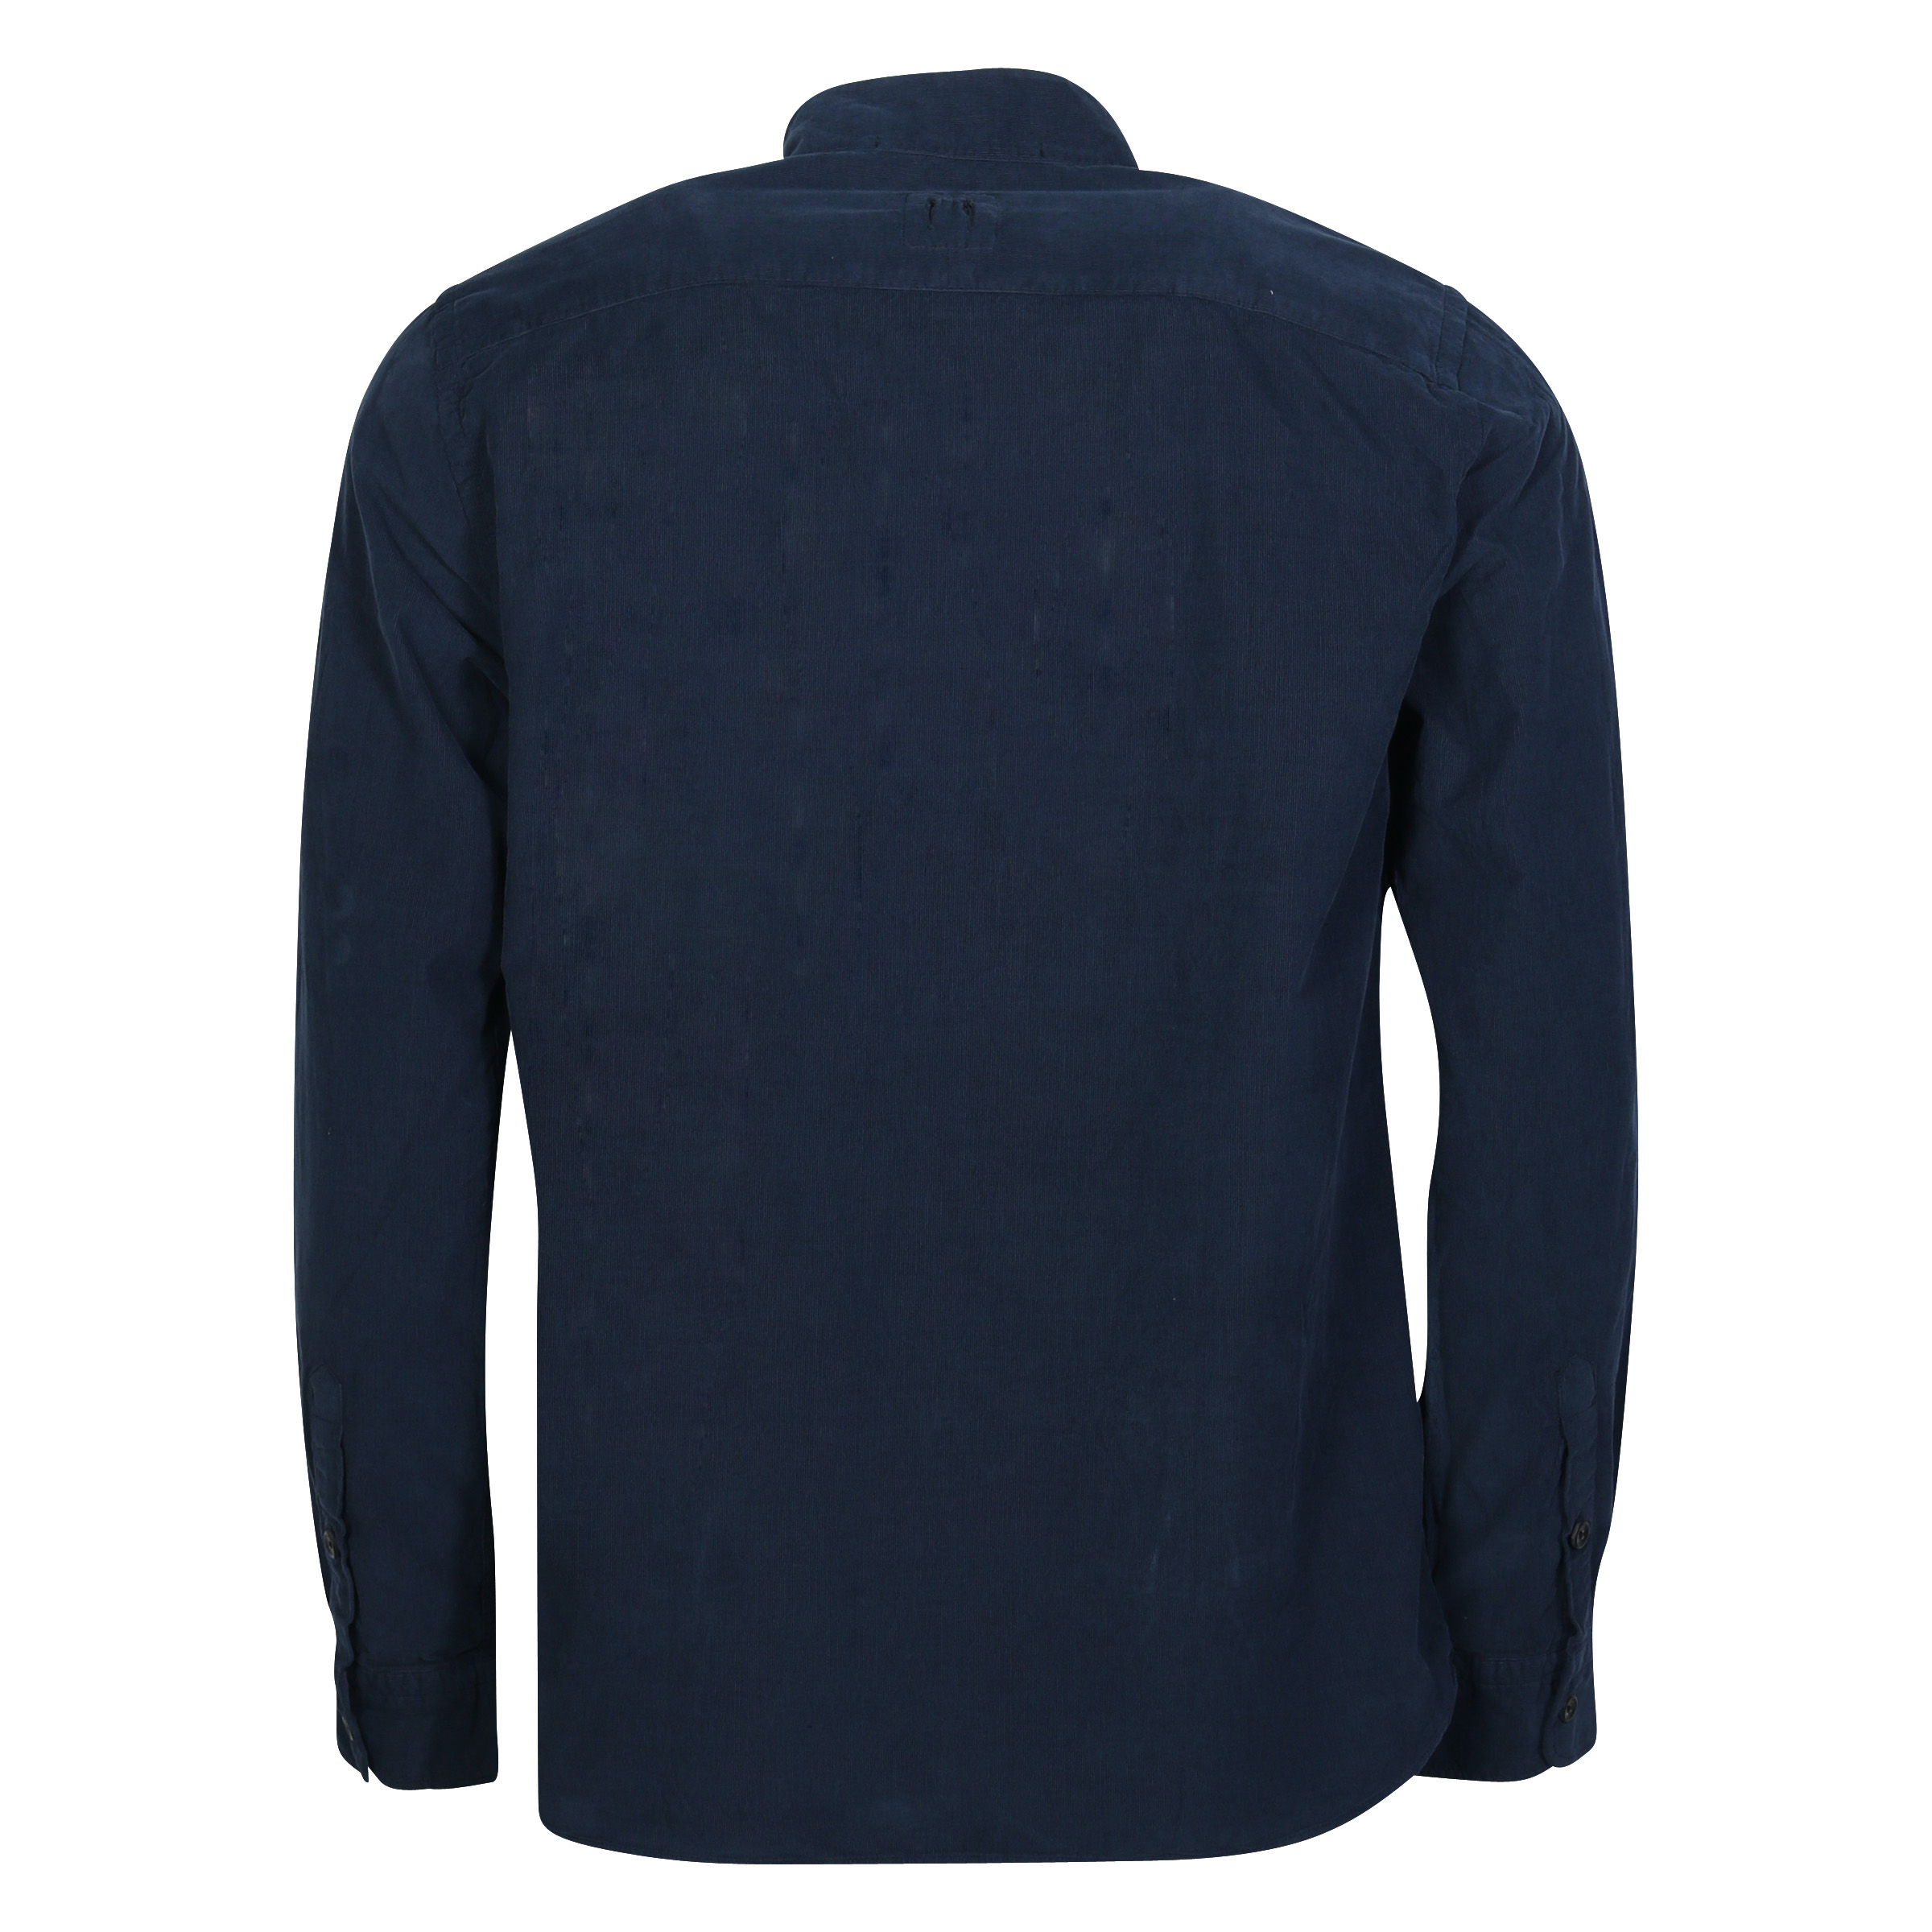 Hannes Roether Fine Corduroy Shirt in Navy